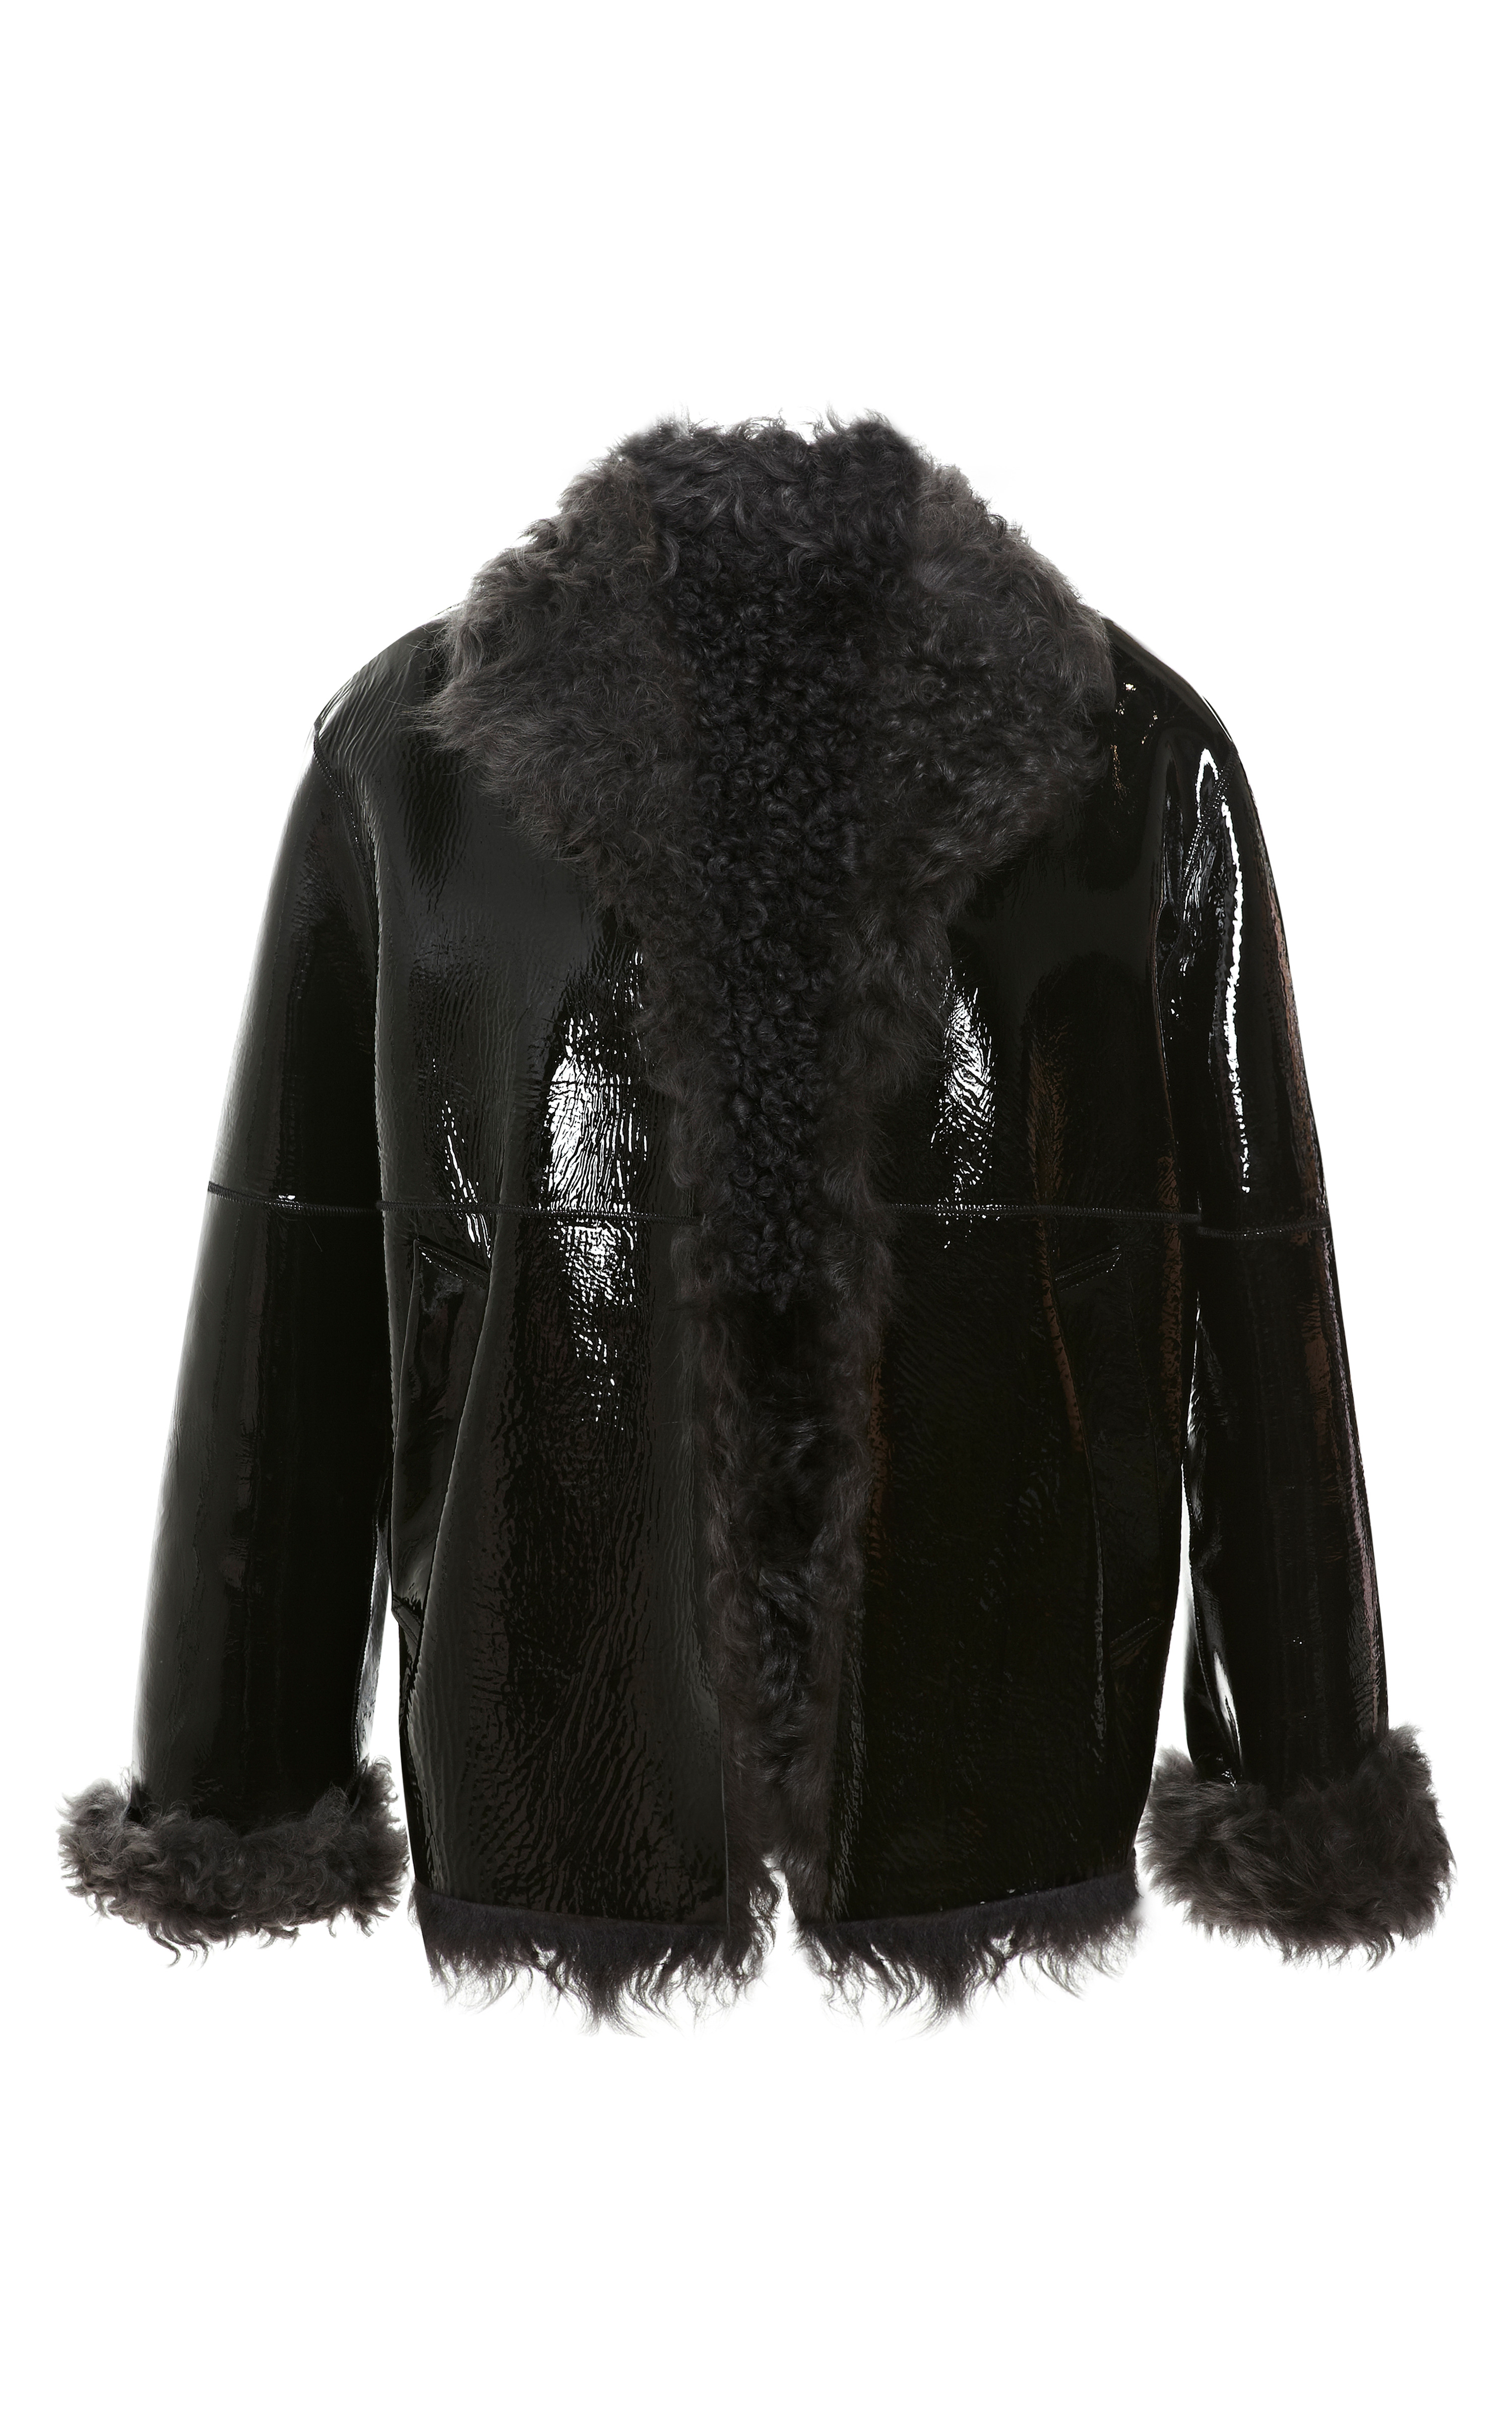 Christopher Kane Patent Leather Bonded Shearling Jacket in Black - Lyst